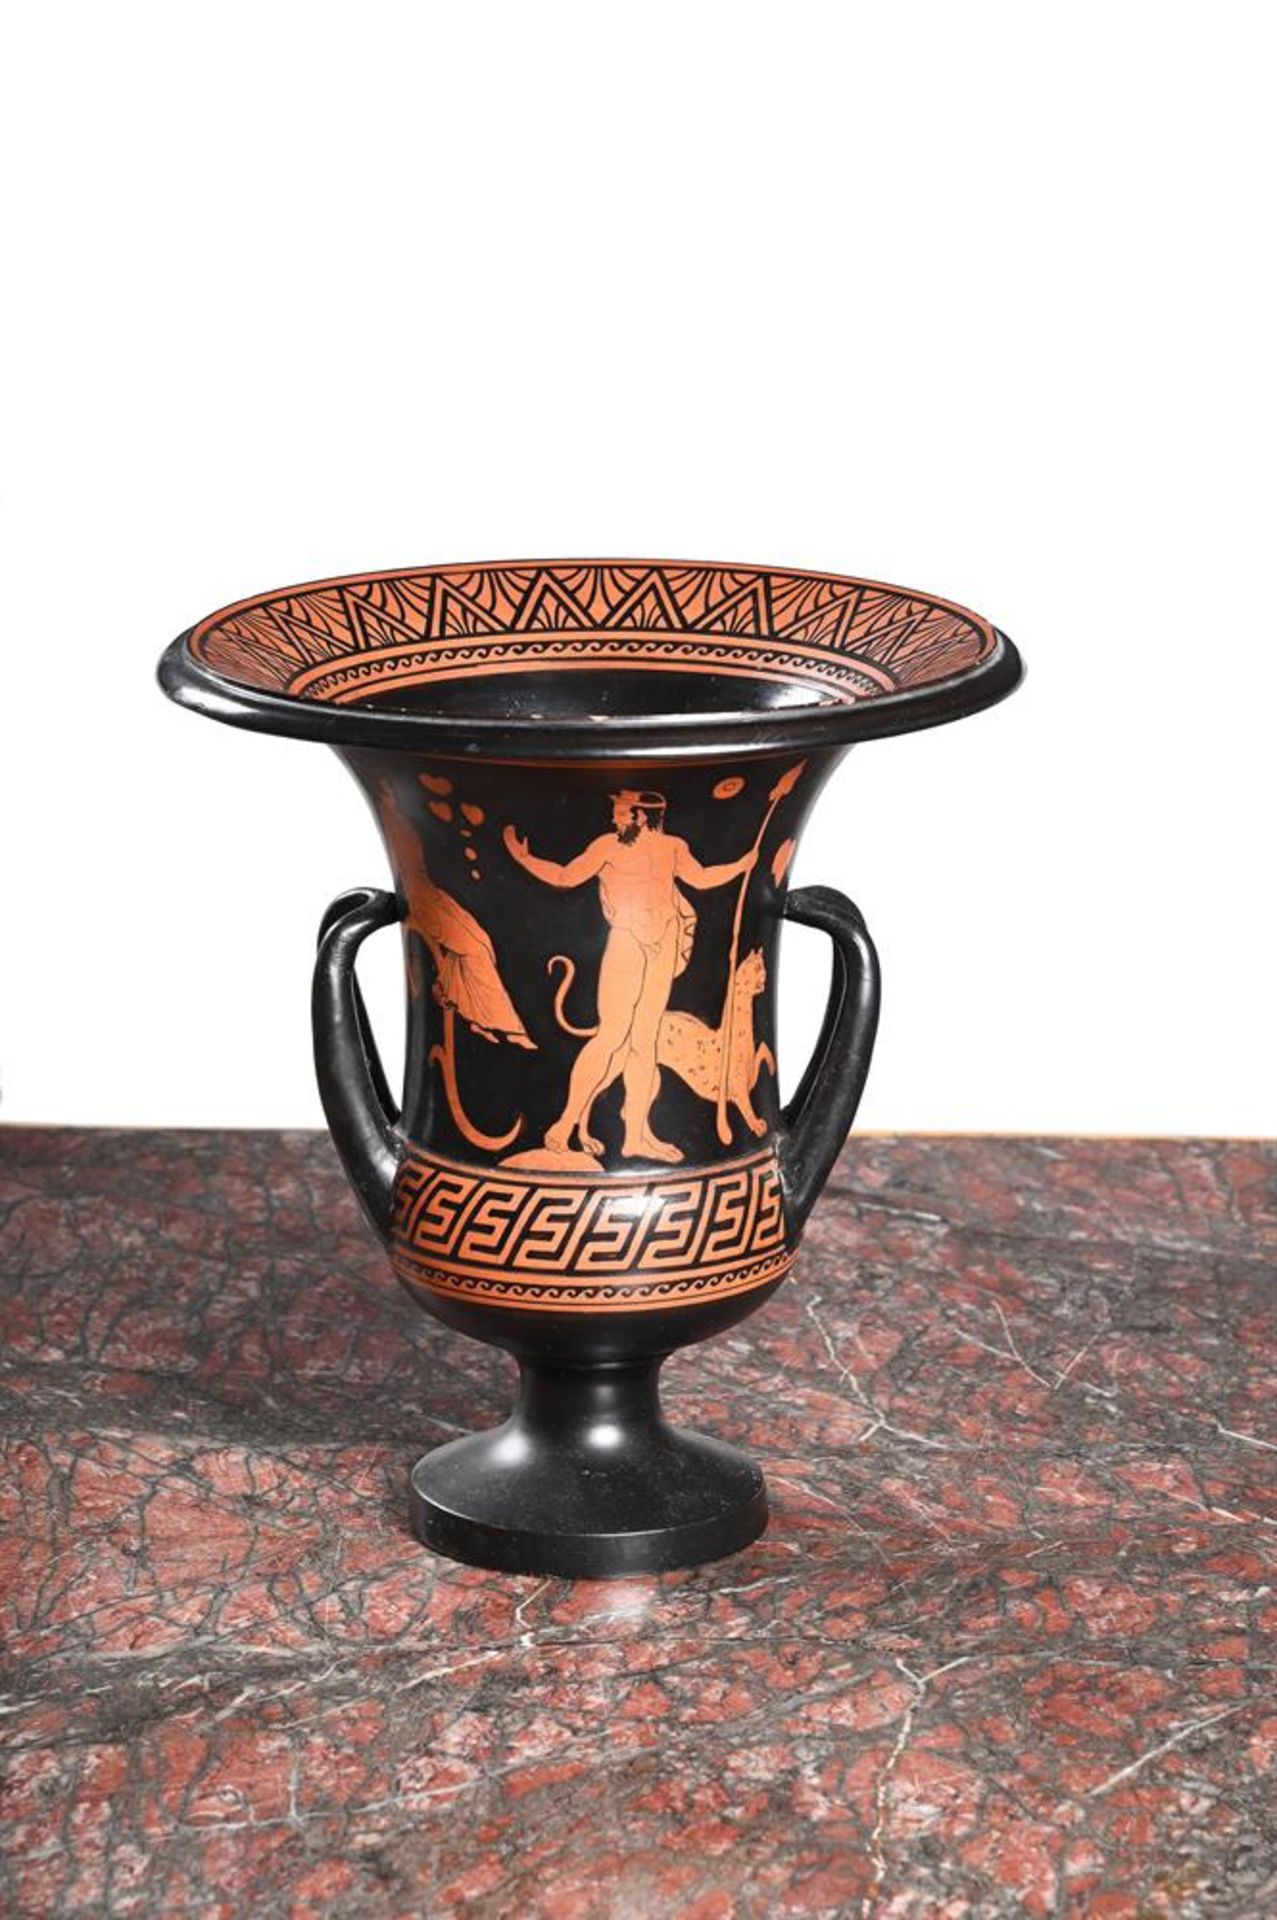 A CHIRINTO DEL VECCHIO CALYX KRATER VASE IN THE GREEK STYLE, MID 19TH CENTURY